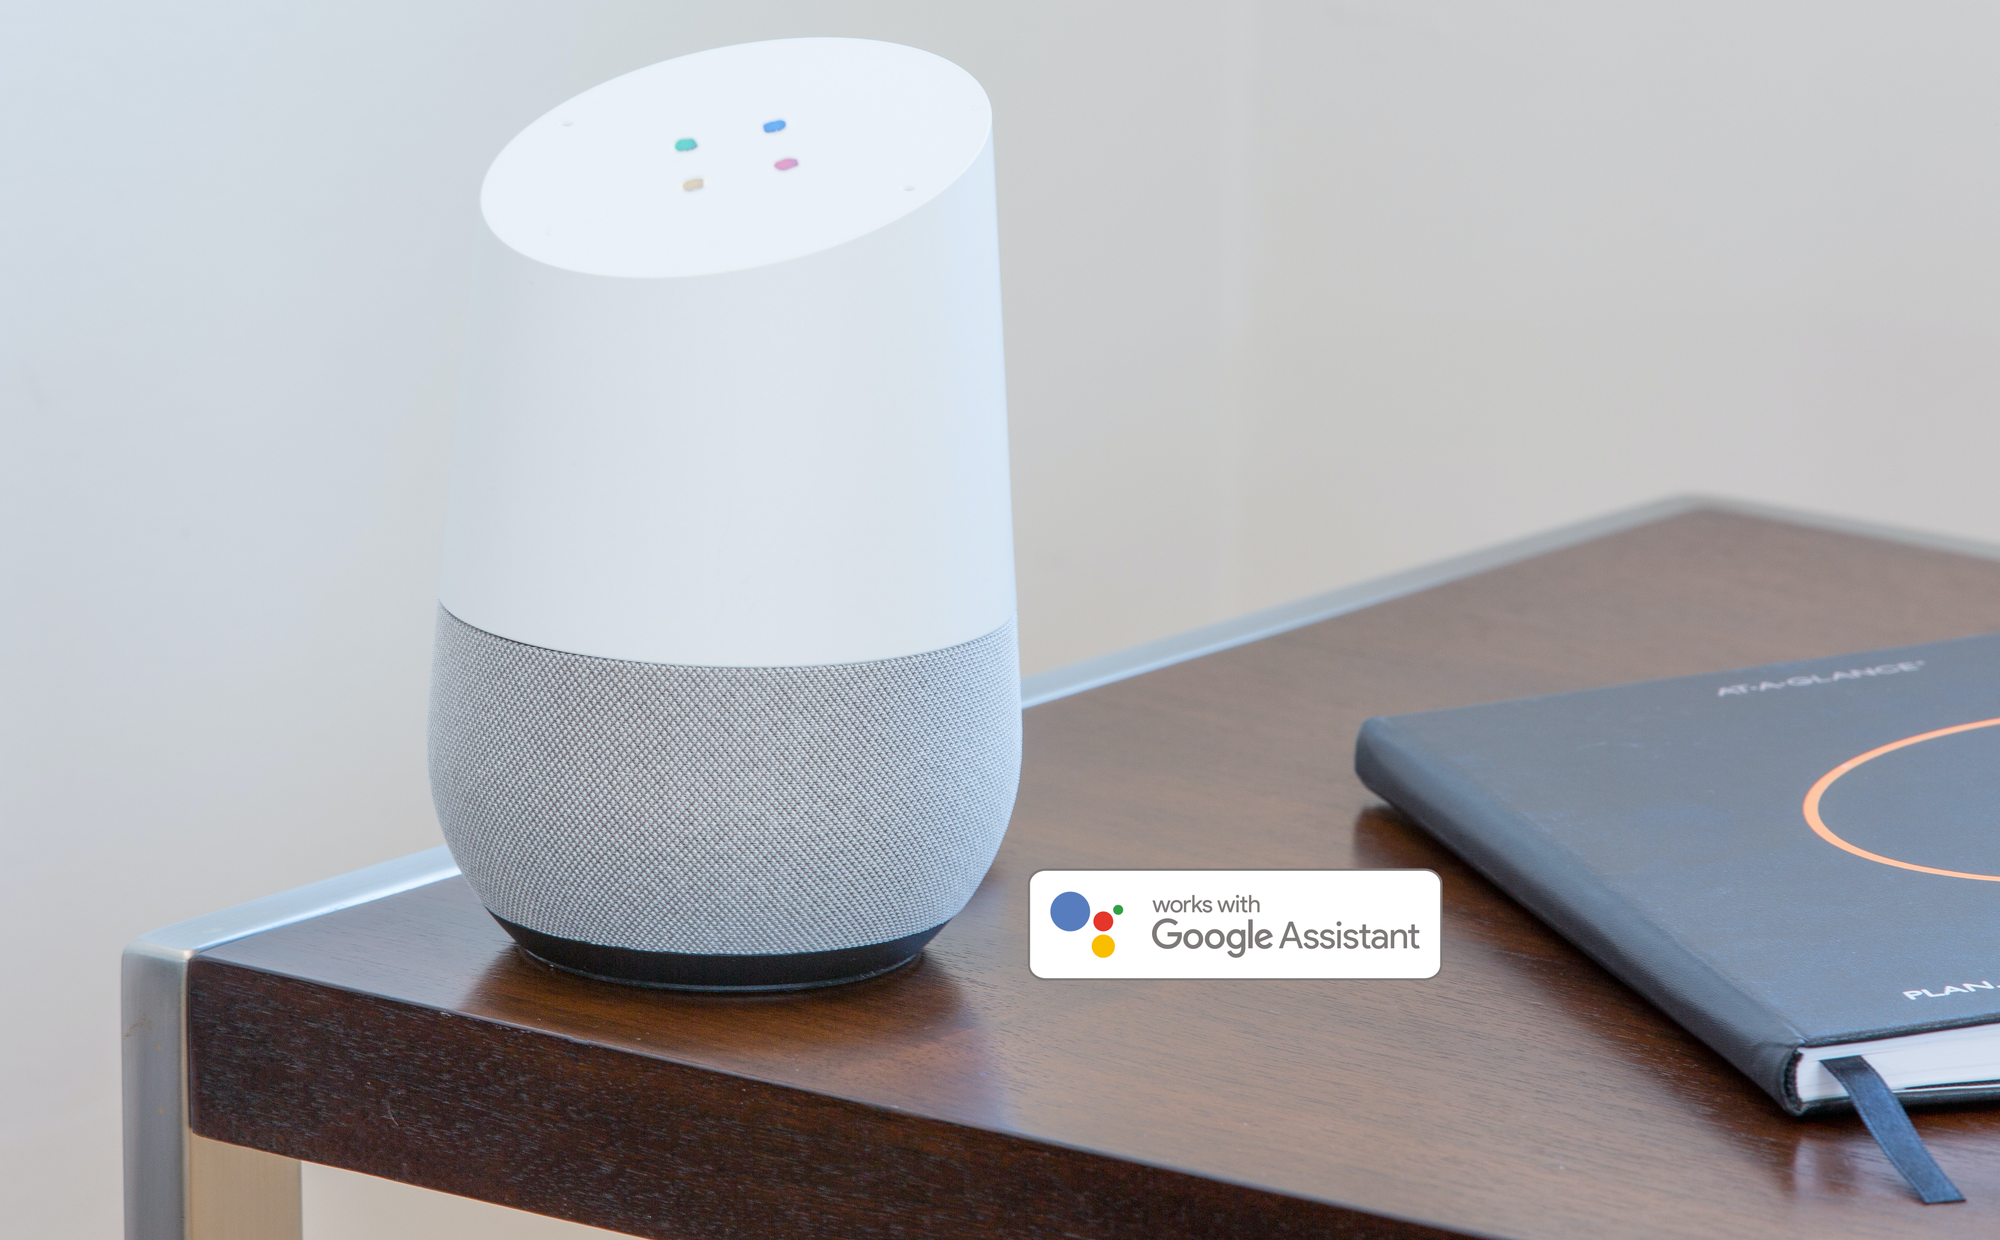 Connect Google Assistant to Hihome